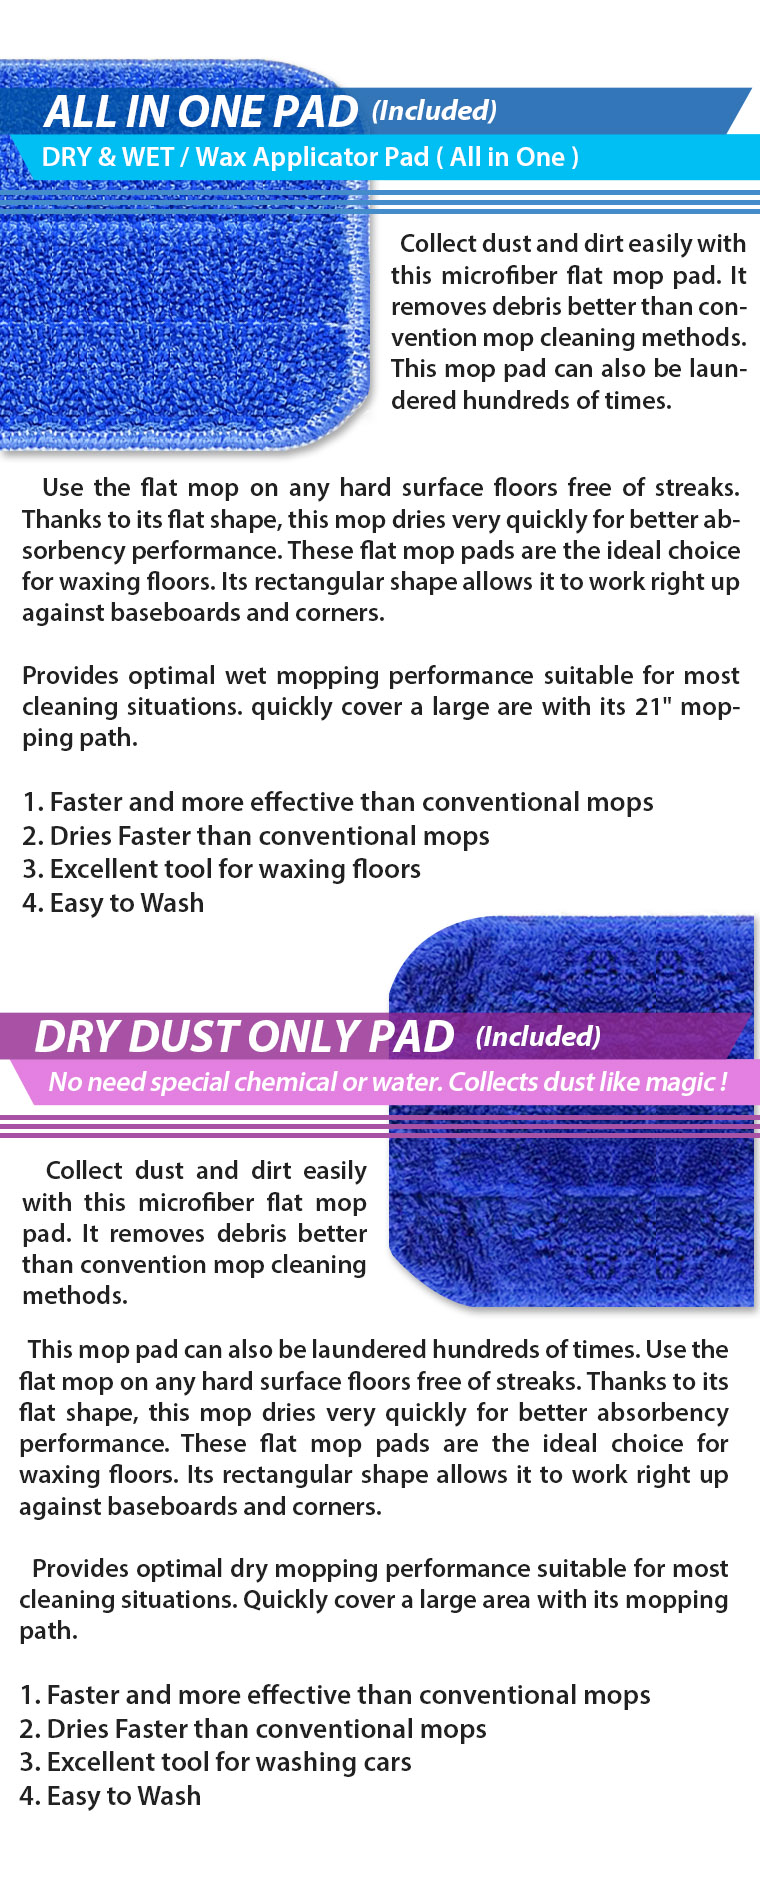 ALL IN ONE PAD(Included) DRY & WET / Wax Applicator Pad ( All in One ). Collect dust and dirt easily with this microfiber flat mop pad. It removes debris better than convention mop cleaning methods. This mop pad can also be laundered hundreds of times. Use the flat mop on any hard surface floors free of streaks. Thanks to its flat shape, this mop dries very quickly for better absorbency performance. These flat mop pads are the ideal choice for waxing floors. Its rectangular shape allows it to work right up against baseboards and corners. Provides optimal wet mopping performance suitable for most cleaning situations. quickly cover a large are with its 21 inch mopping path. 1. Faster and more effective than conventional mops 2. Dries Faster than conventional mops 3. Excellent tool for waxing floors 4. Easy to Wash